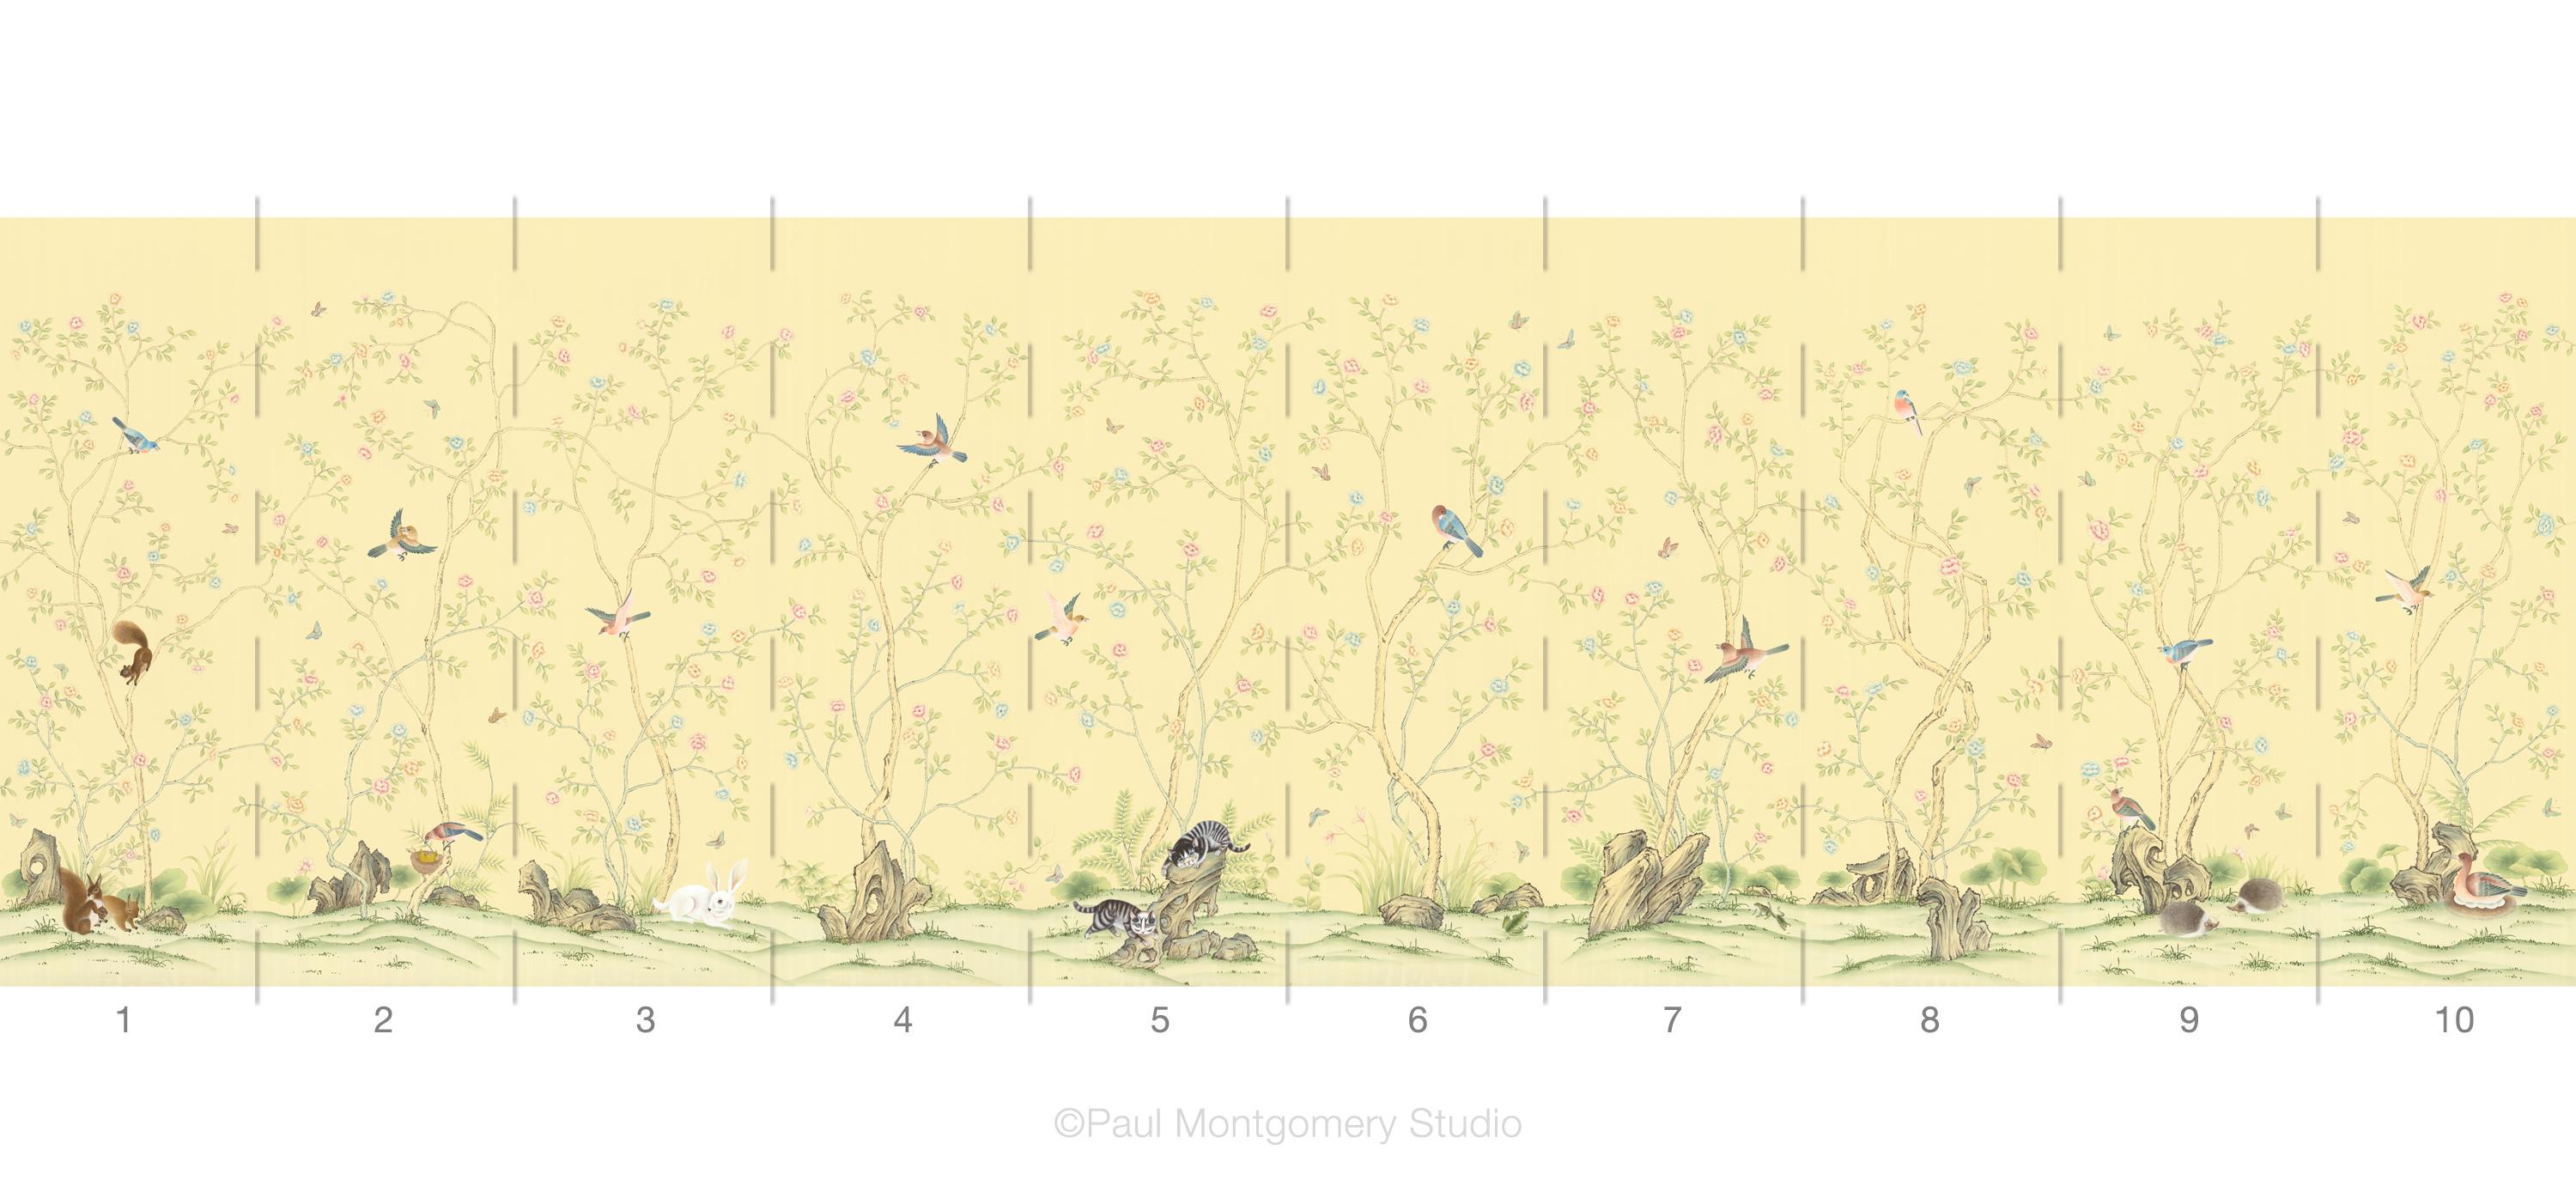 This delightful Chinoiserie wallpaper mural was created with children in mind.  Soft tones of yellow, red and blue are used to create an idyllic scene in which a host of cute animals live together.  Each hand painted panel is three feet wide by ten